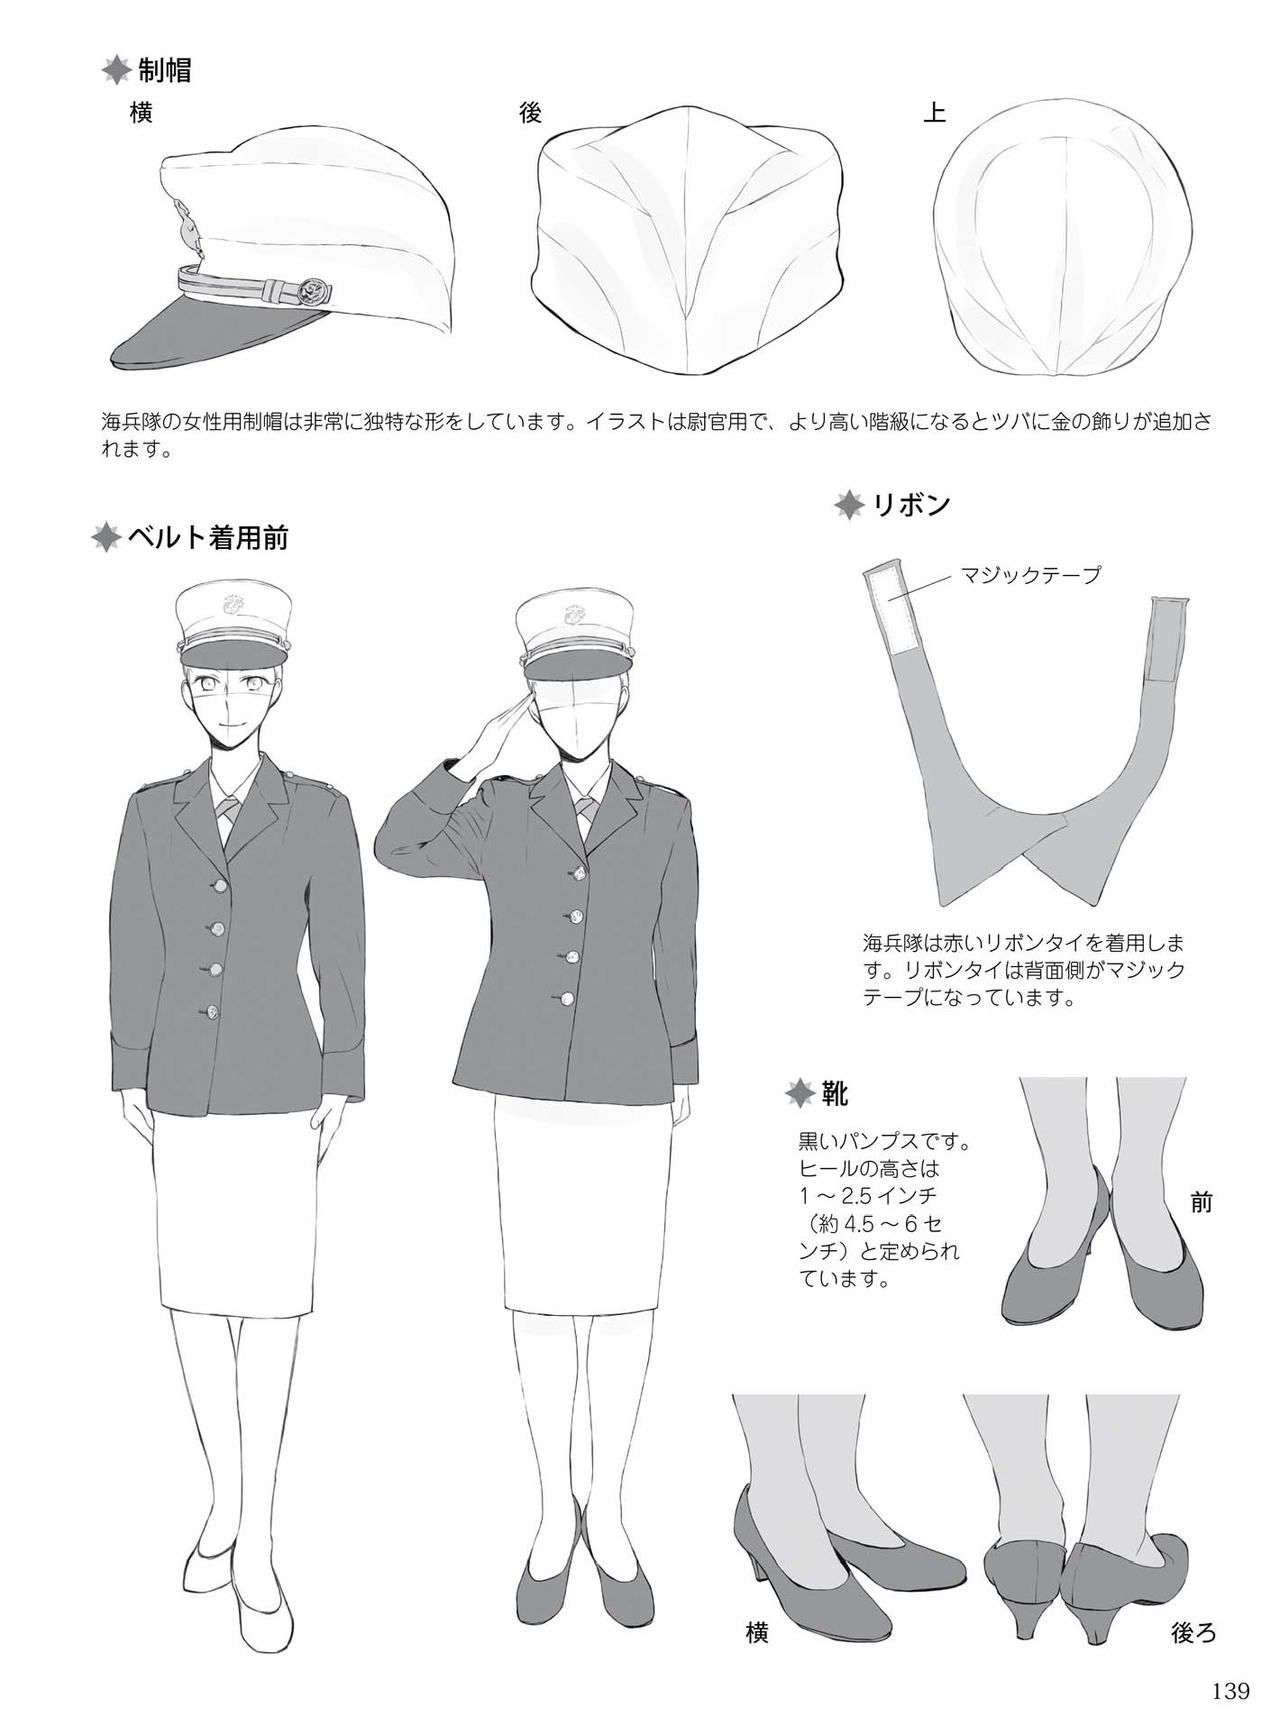 How to draw military uniforms and uniforms From Self-Defense Forces 軍服・制服の描き方 アメリカ軍・自衛隊の制服から戦闘服まで 142